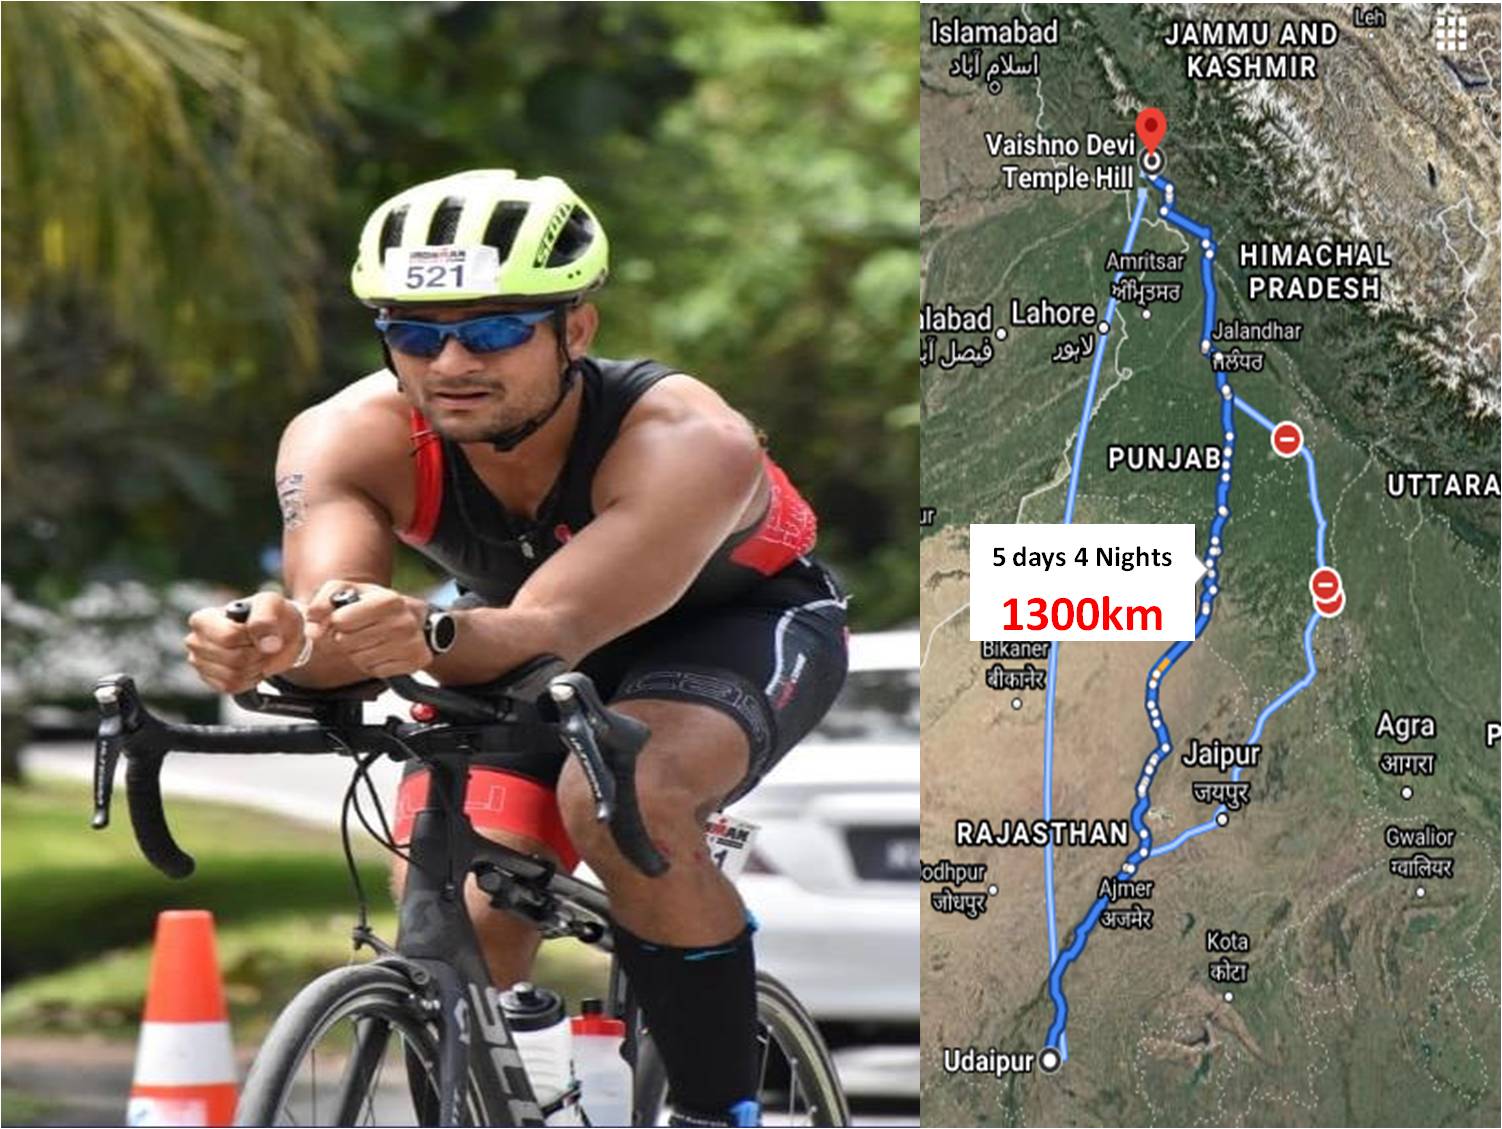 Udaipur's Iron Man set to leave for a record 1300km journey to Vaishno Devi